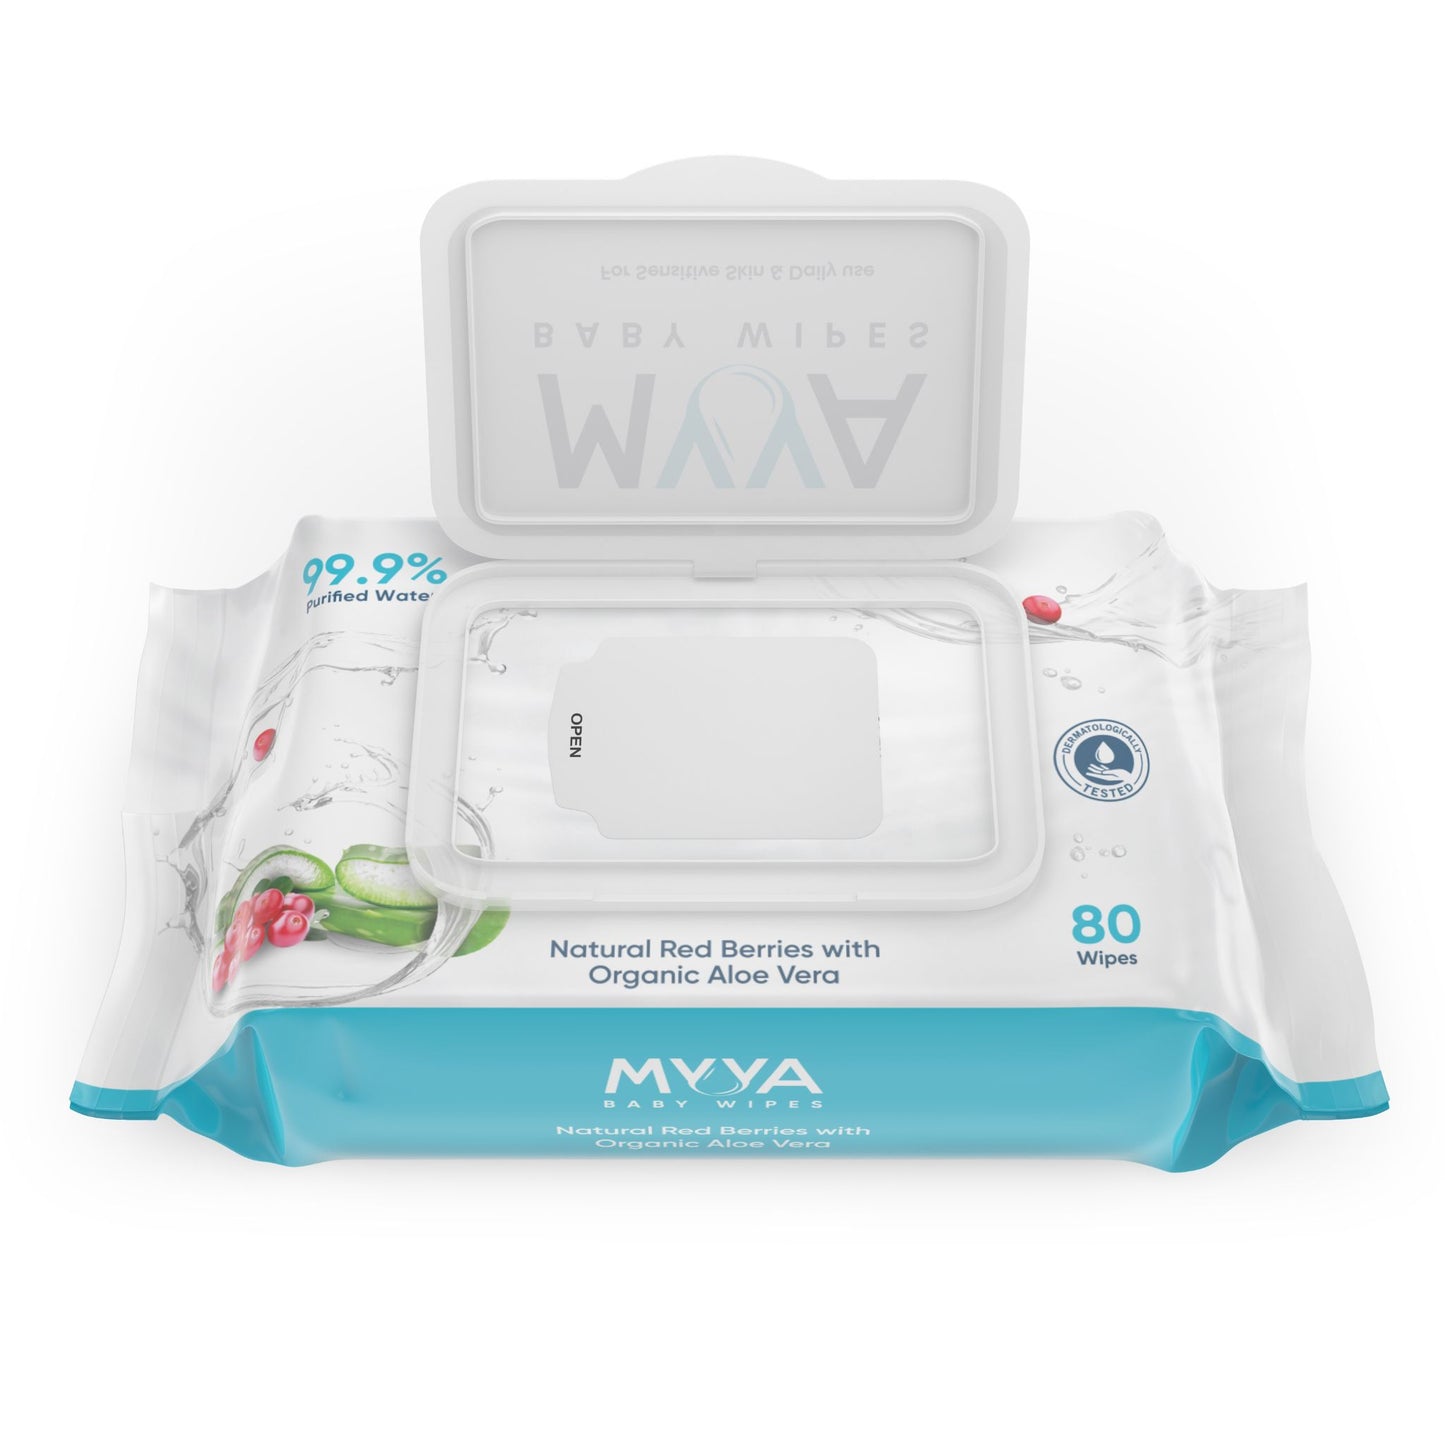 Myya Organic Baby Wipes made with 99.9% Purified Water with a hint of Organic Aloe Vera and Natural Red Berries extract